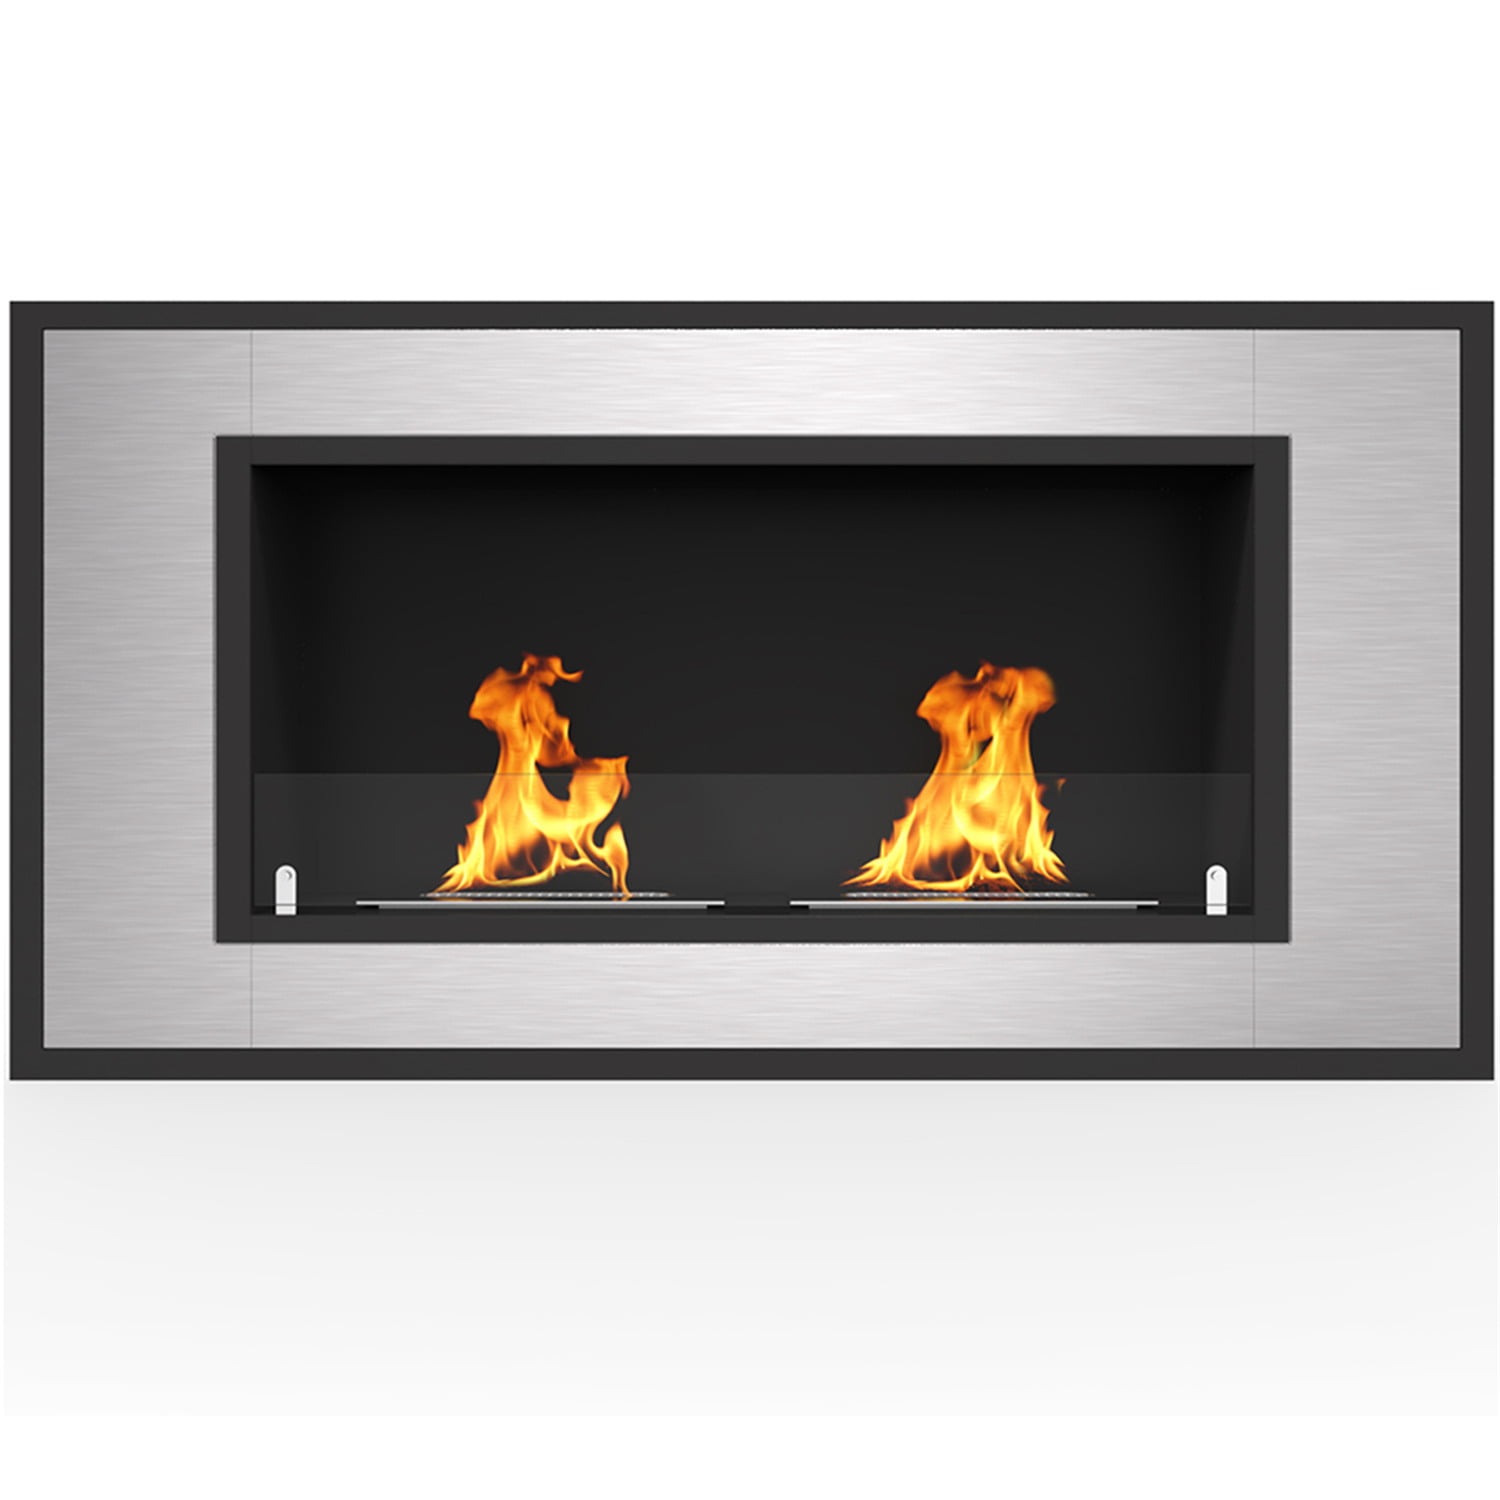 Regal Flame Cynergy 42" Ventless Built In Wall Recessed Bio Ethanol Wall Mounted Fireplace Similar Electric Fireplaces, Gas Logs